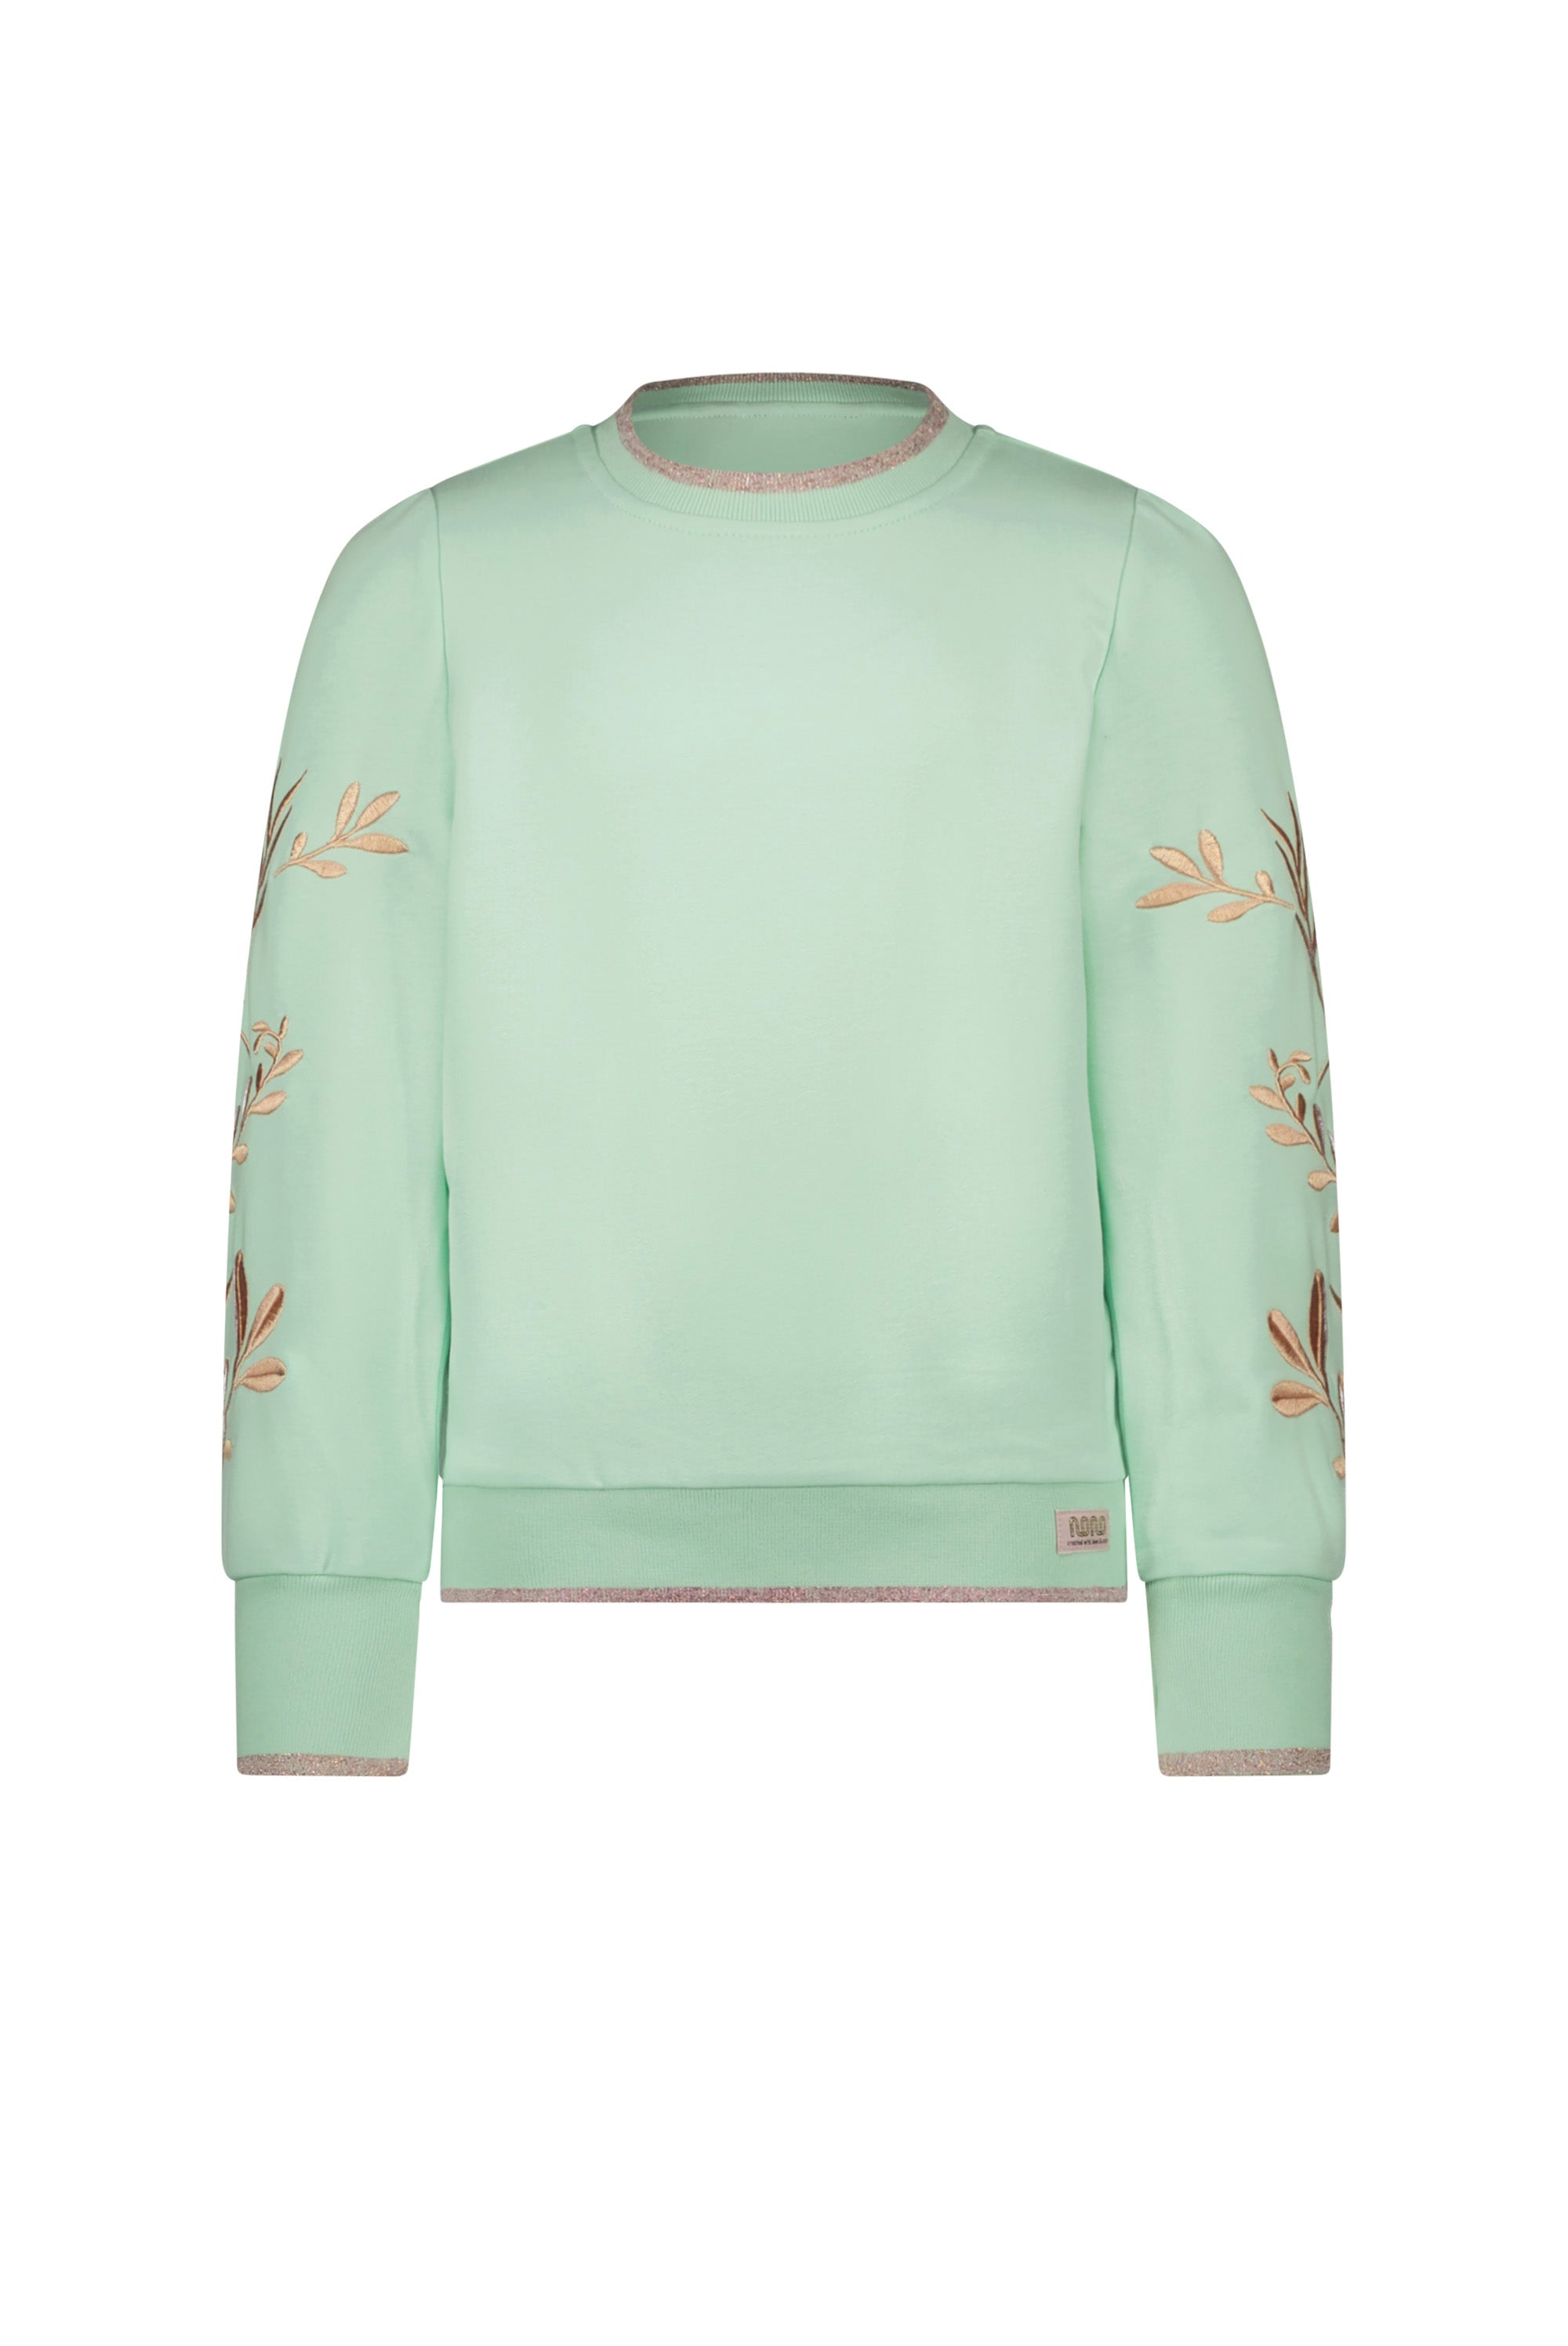 Meisjes Kate round neck sweater with embroidery at sleeves van NoNo in de kleur Soft Pistache in maat 134-140.